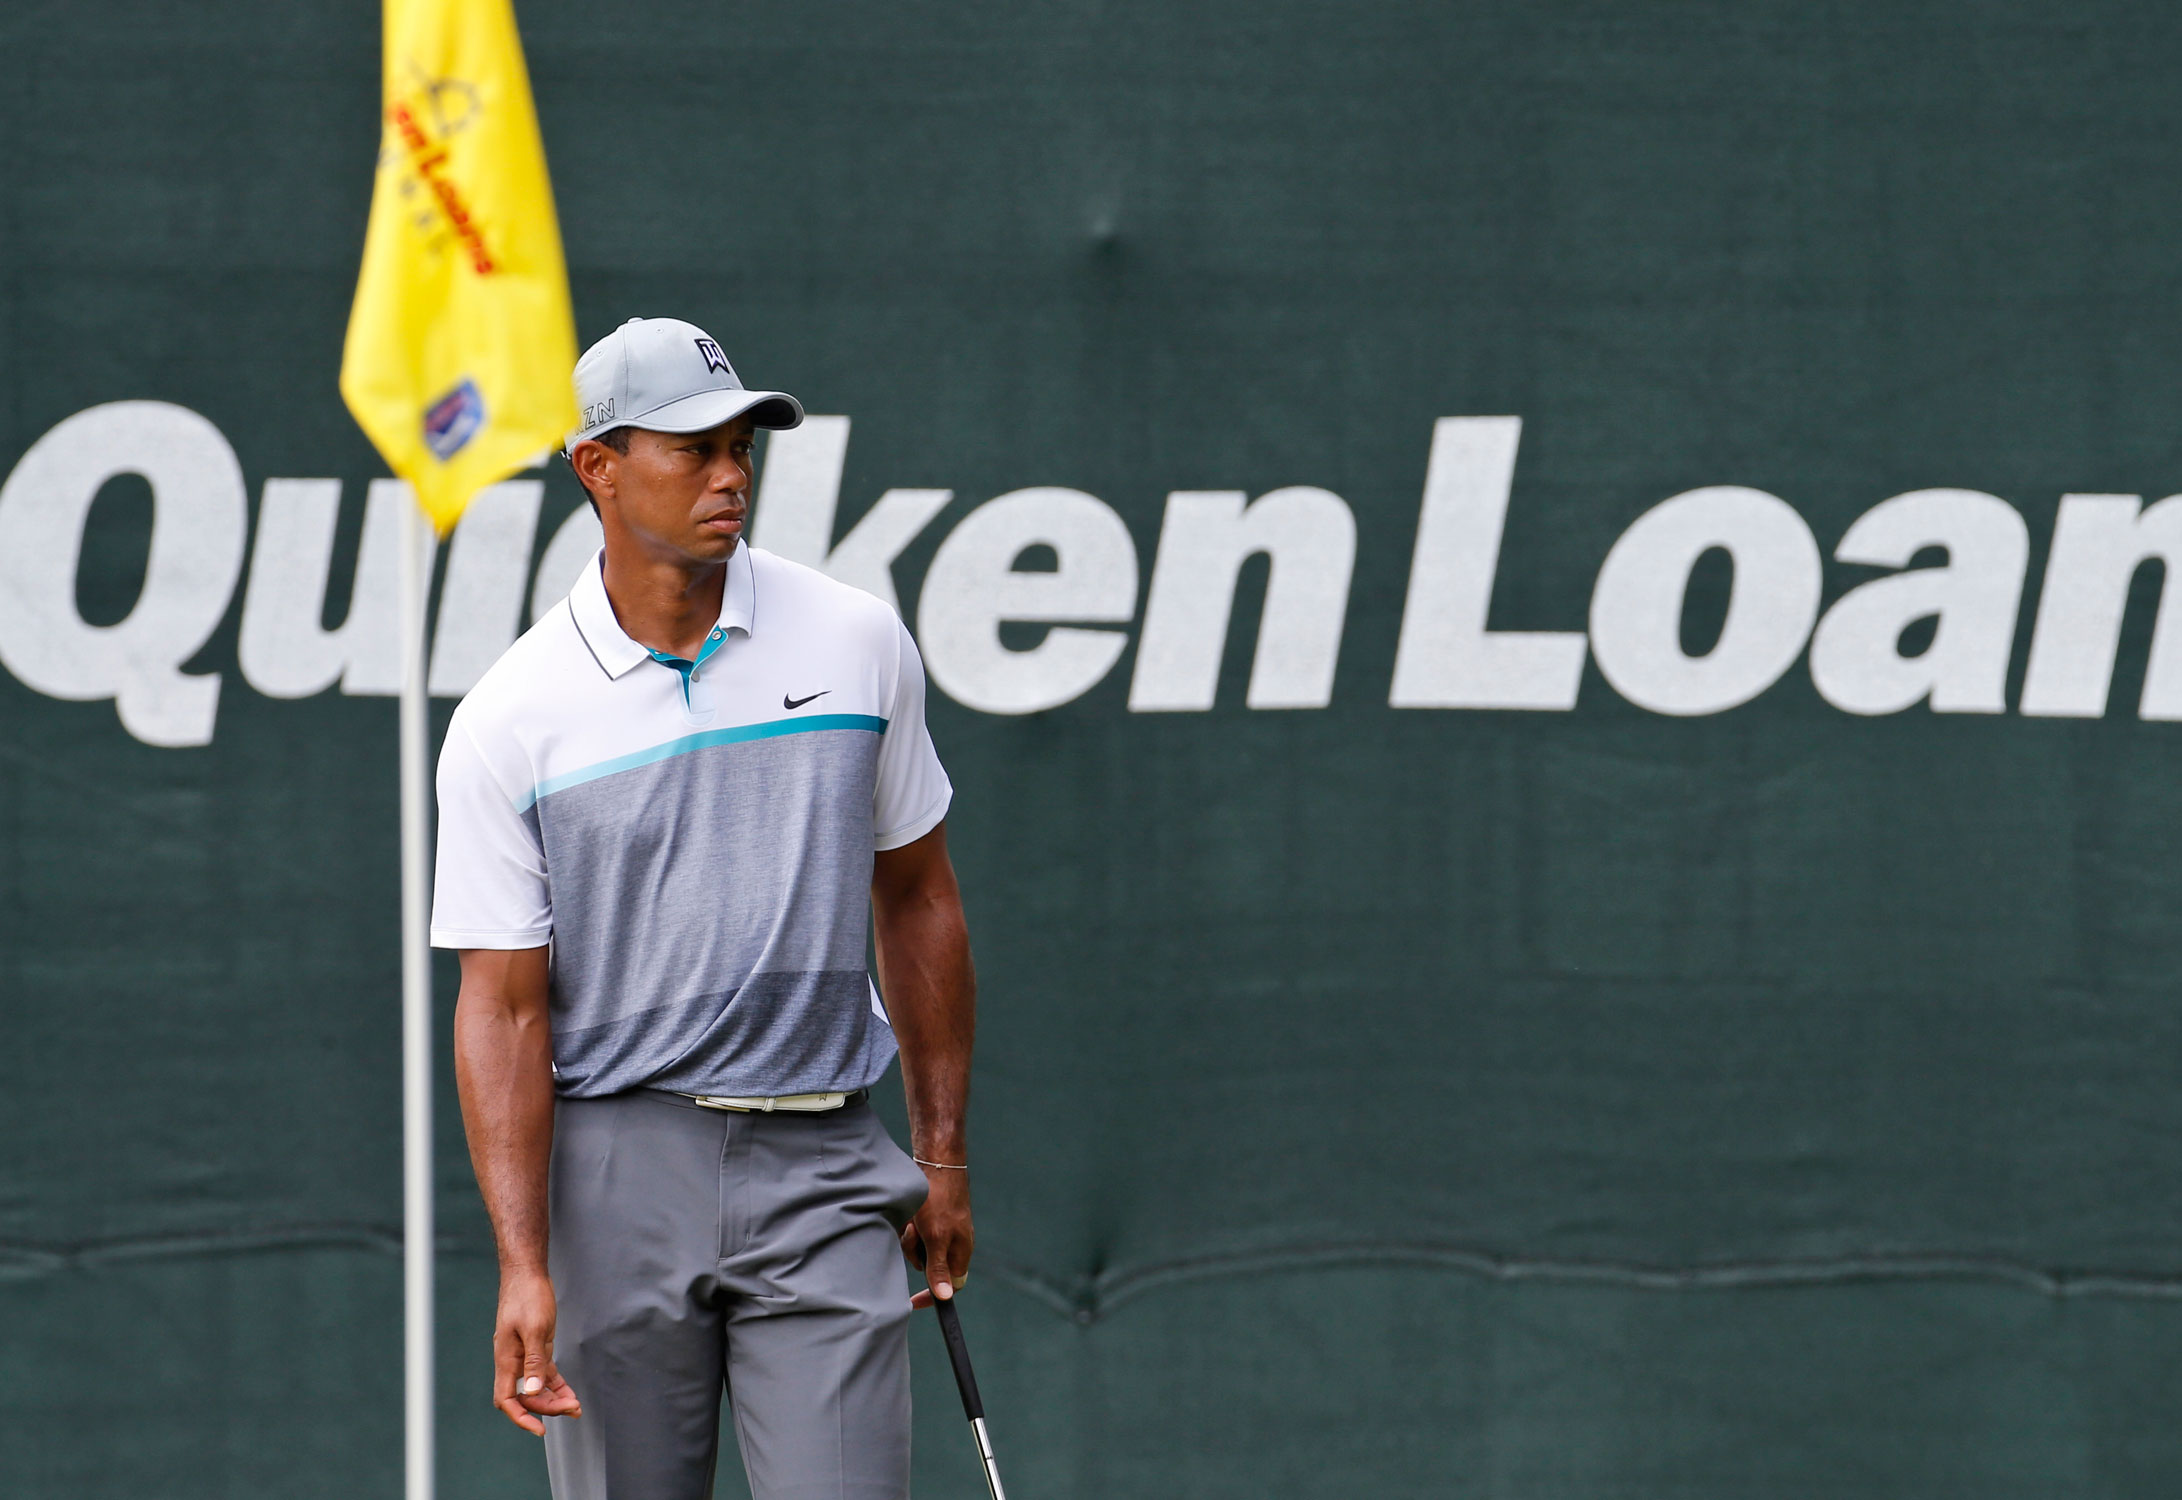 At his own event, more questions than answers for Tiger